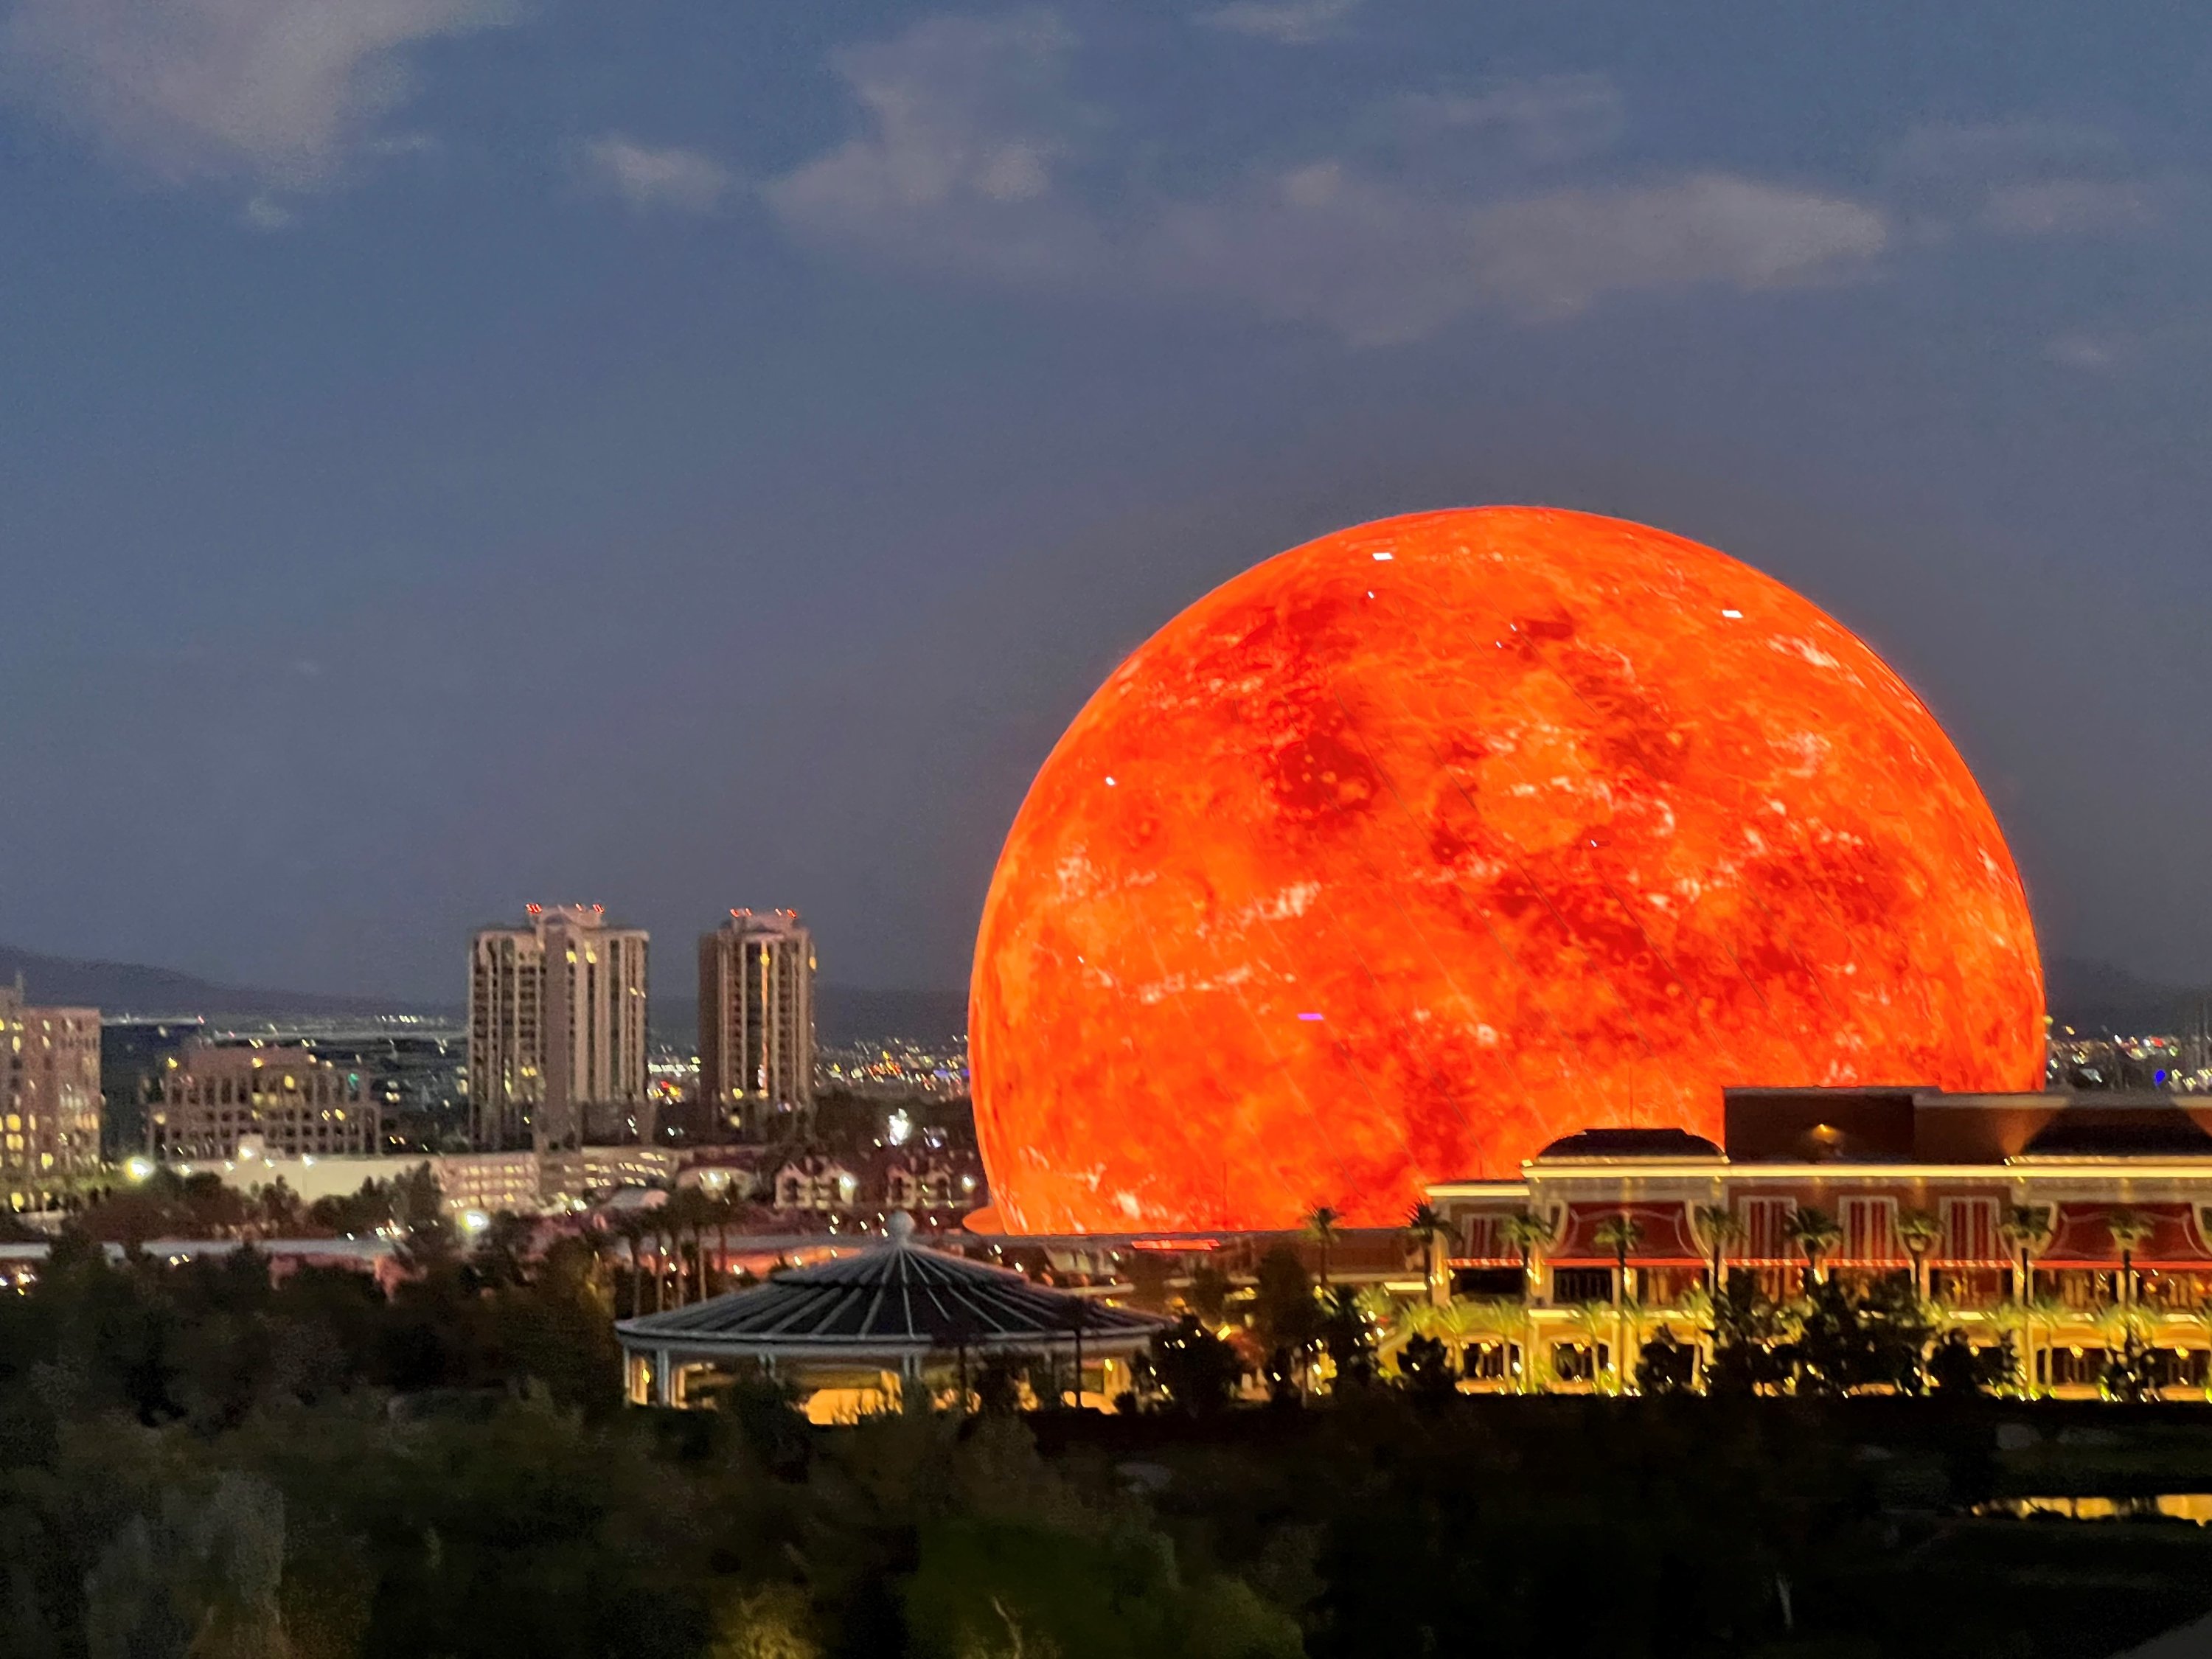 photo of the Sphere in Las Vegas glowing red like a planet